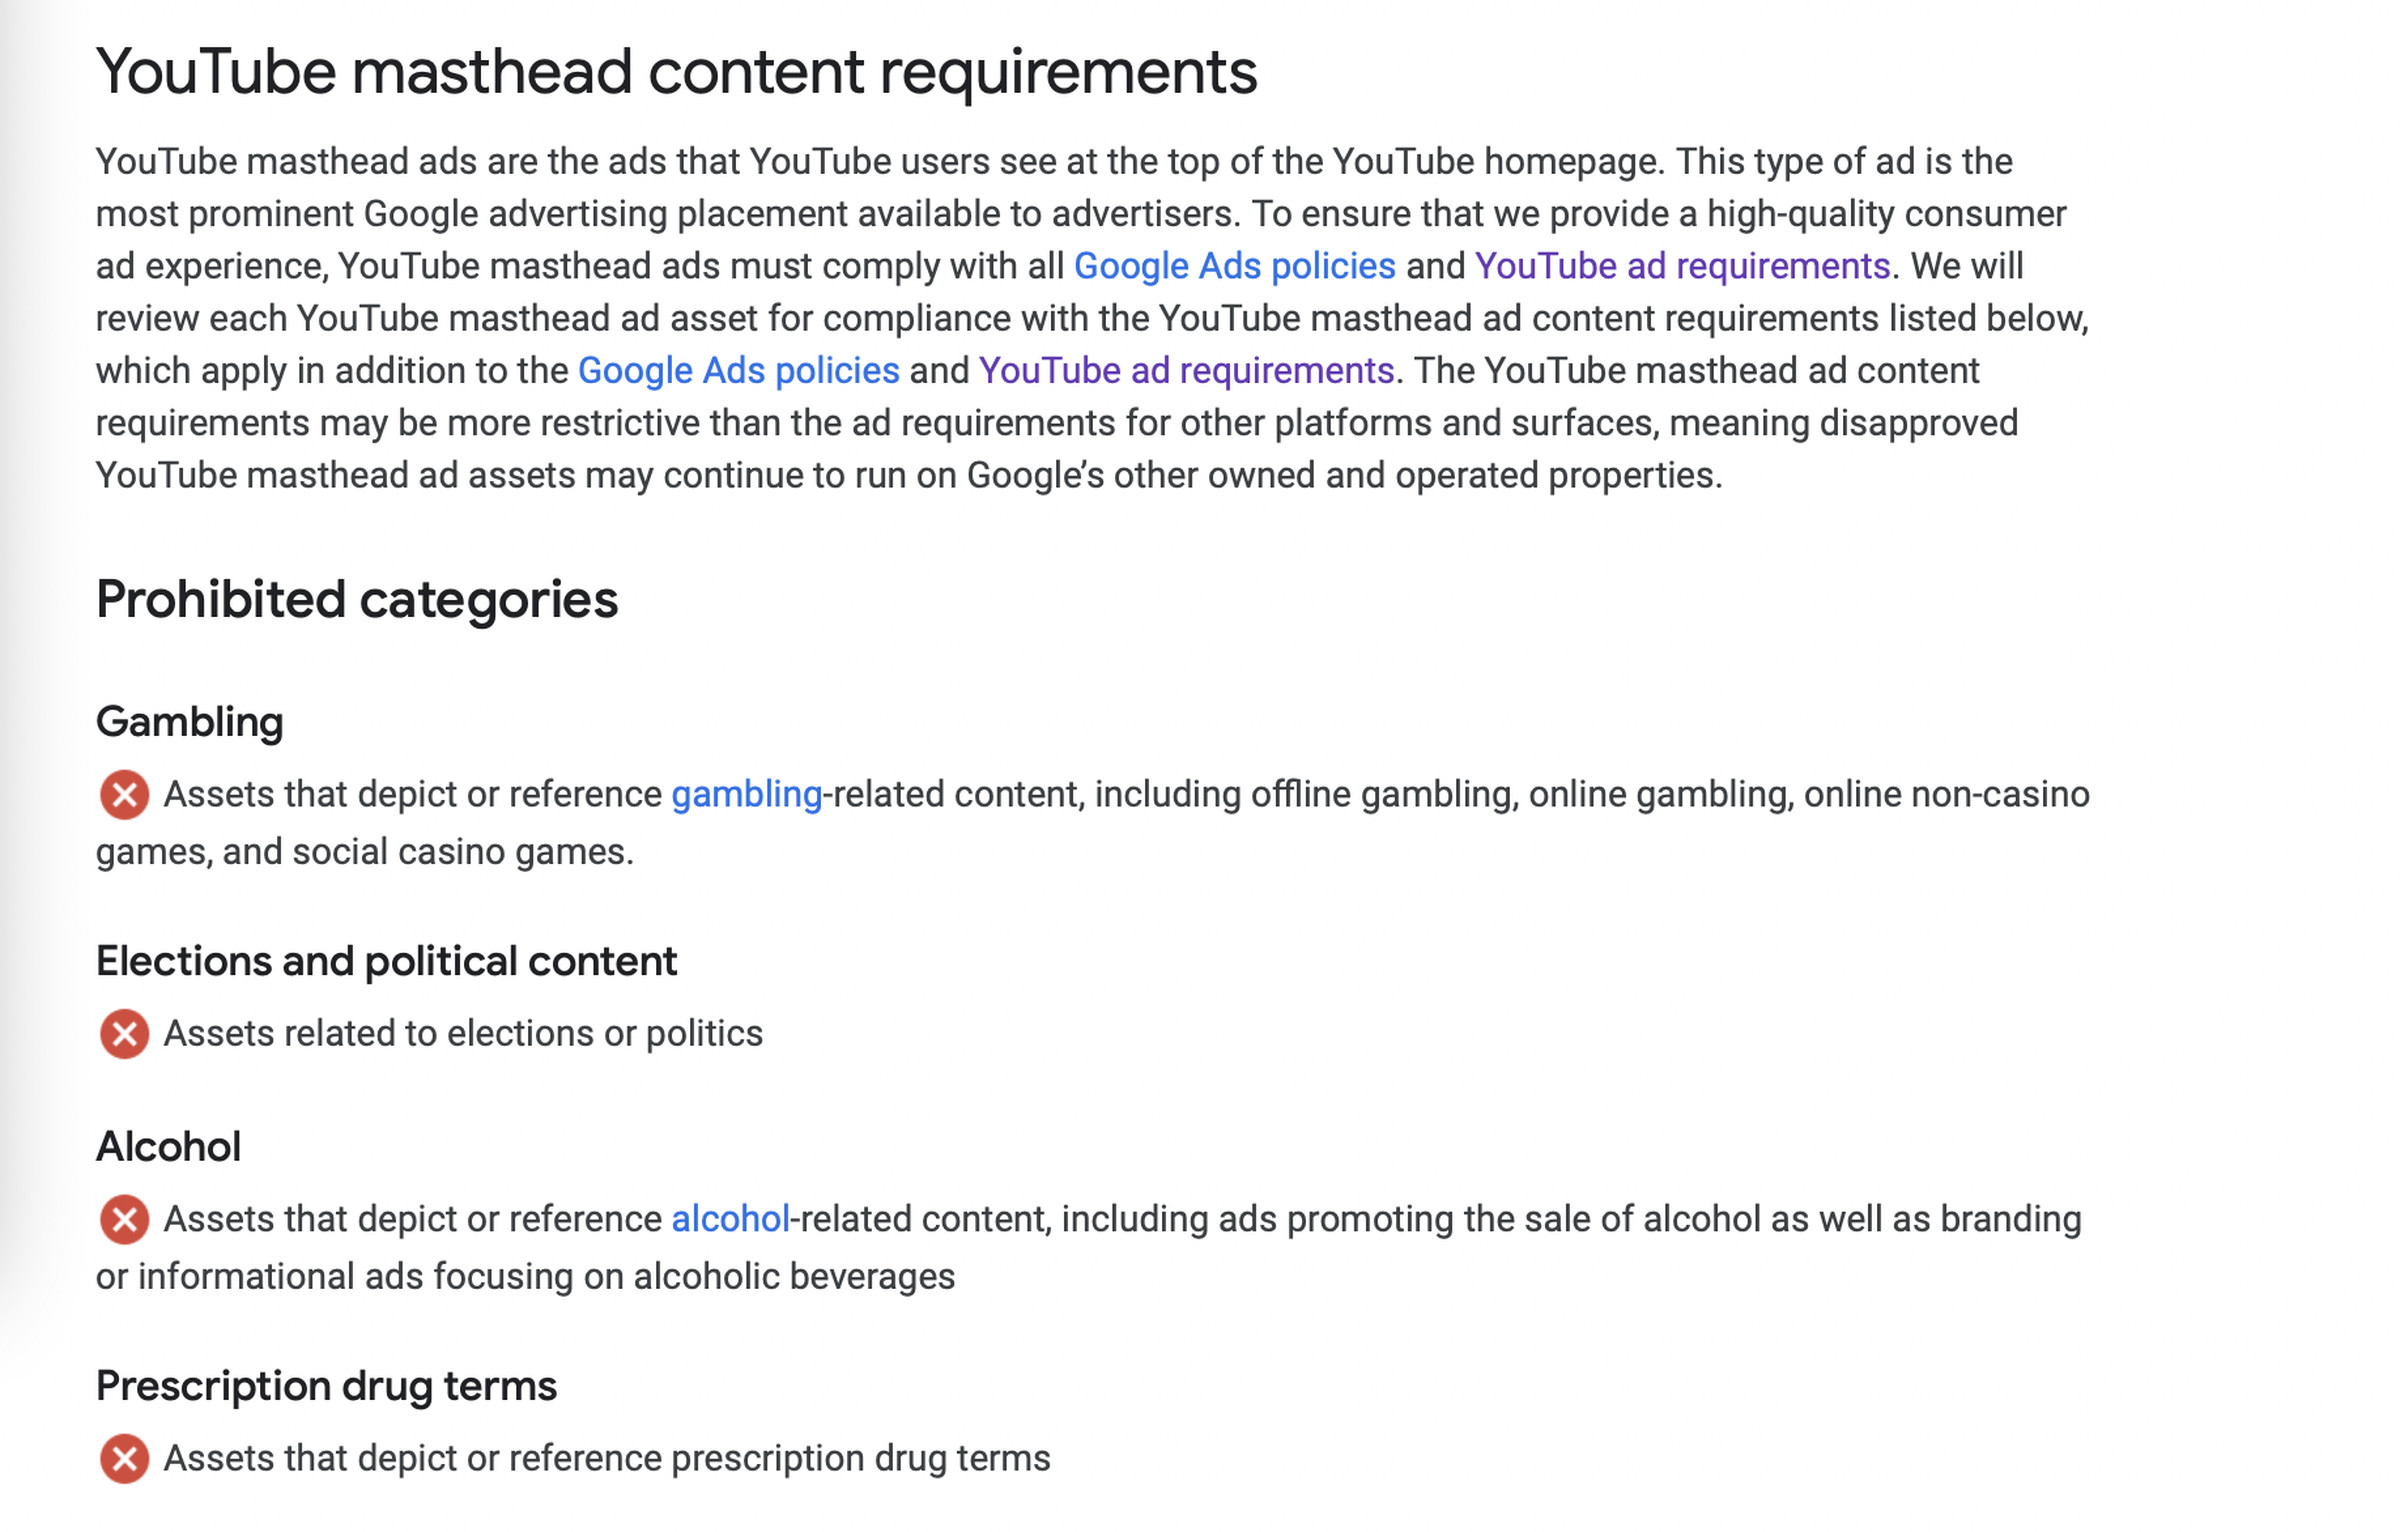 YouTube’s new masthead requirements.